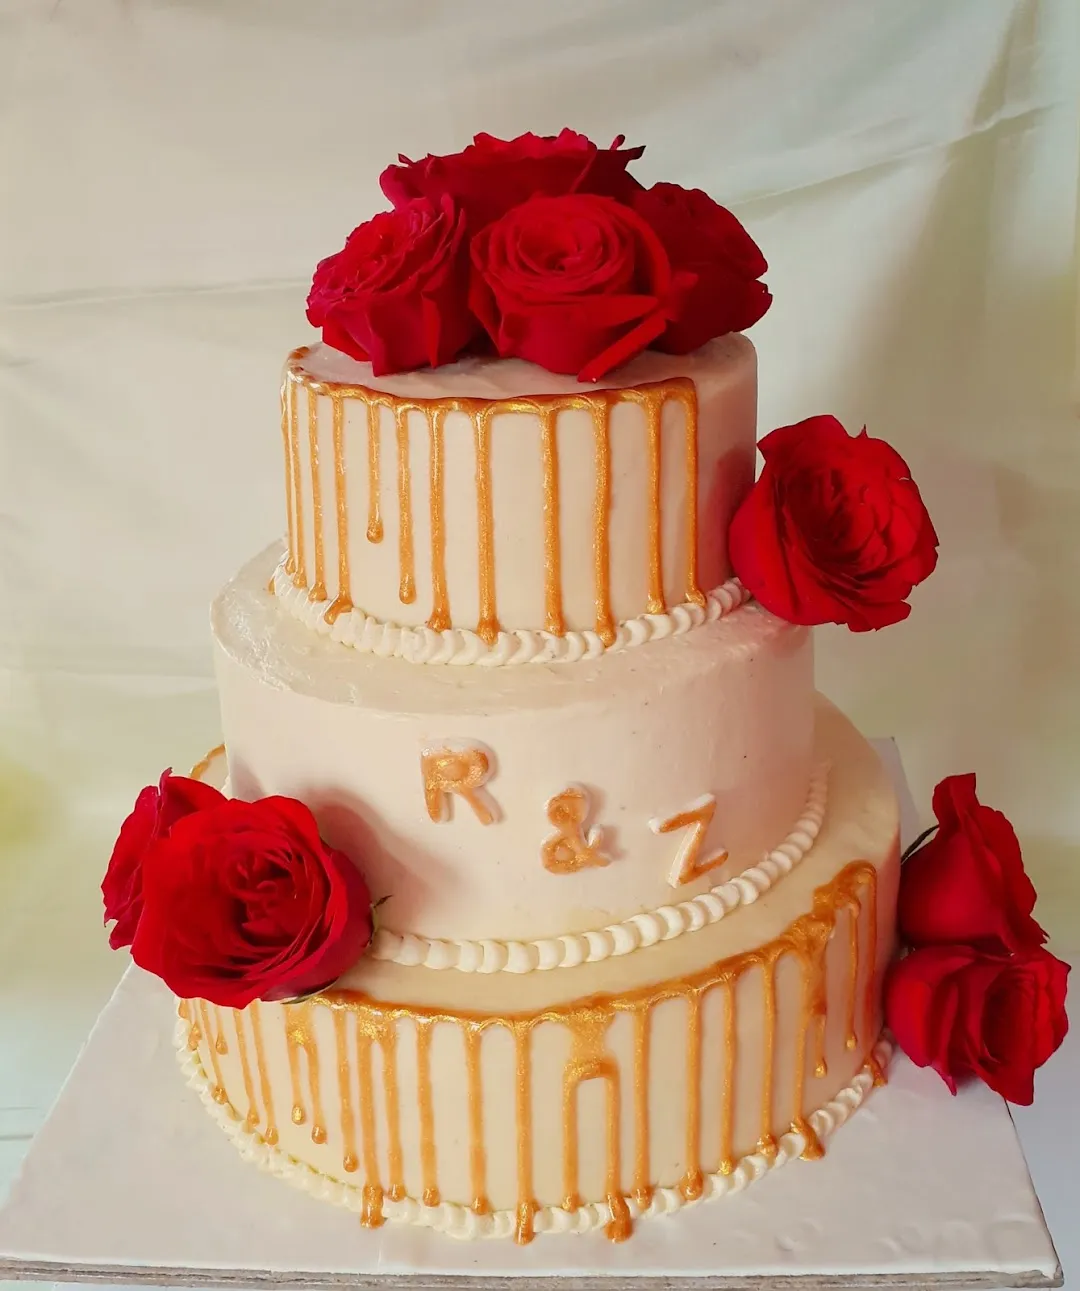 Cakelicious - the most beautiful cakes in town | Indore